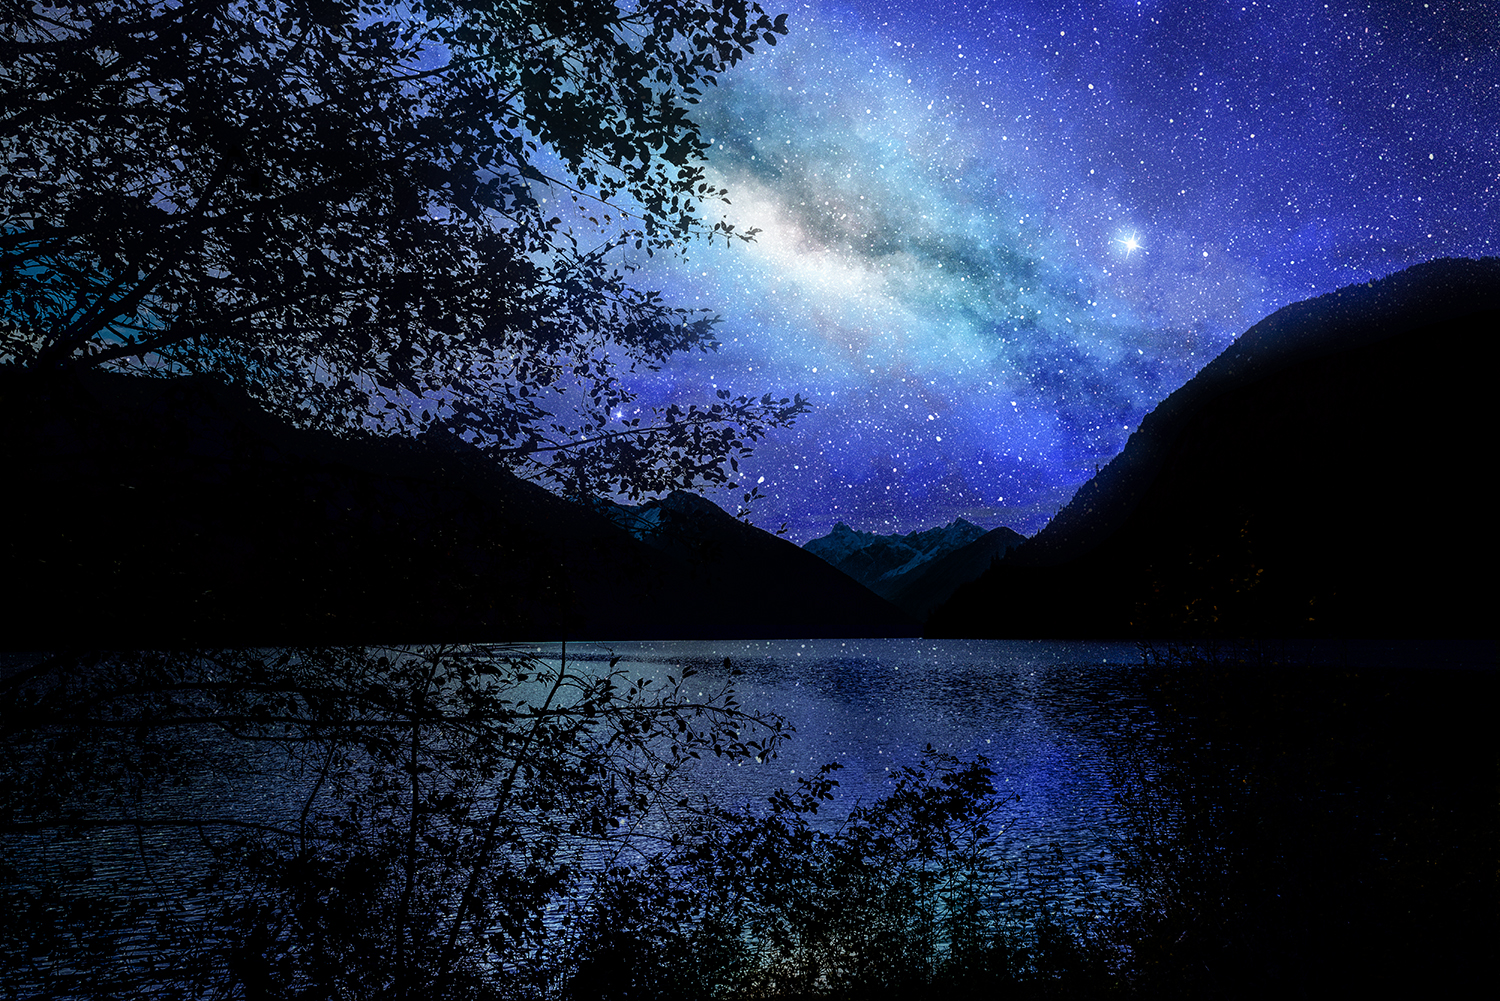 Kamloops Landscape night sky with stars with lake and mountains with trees